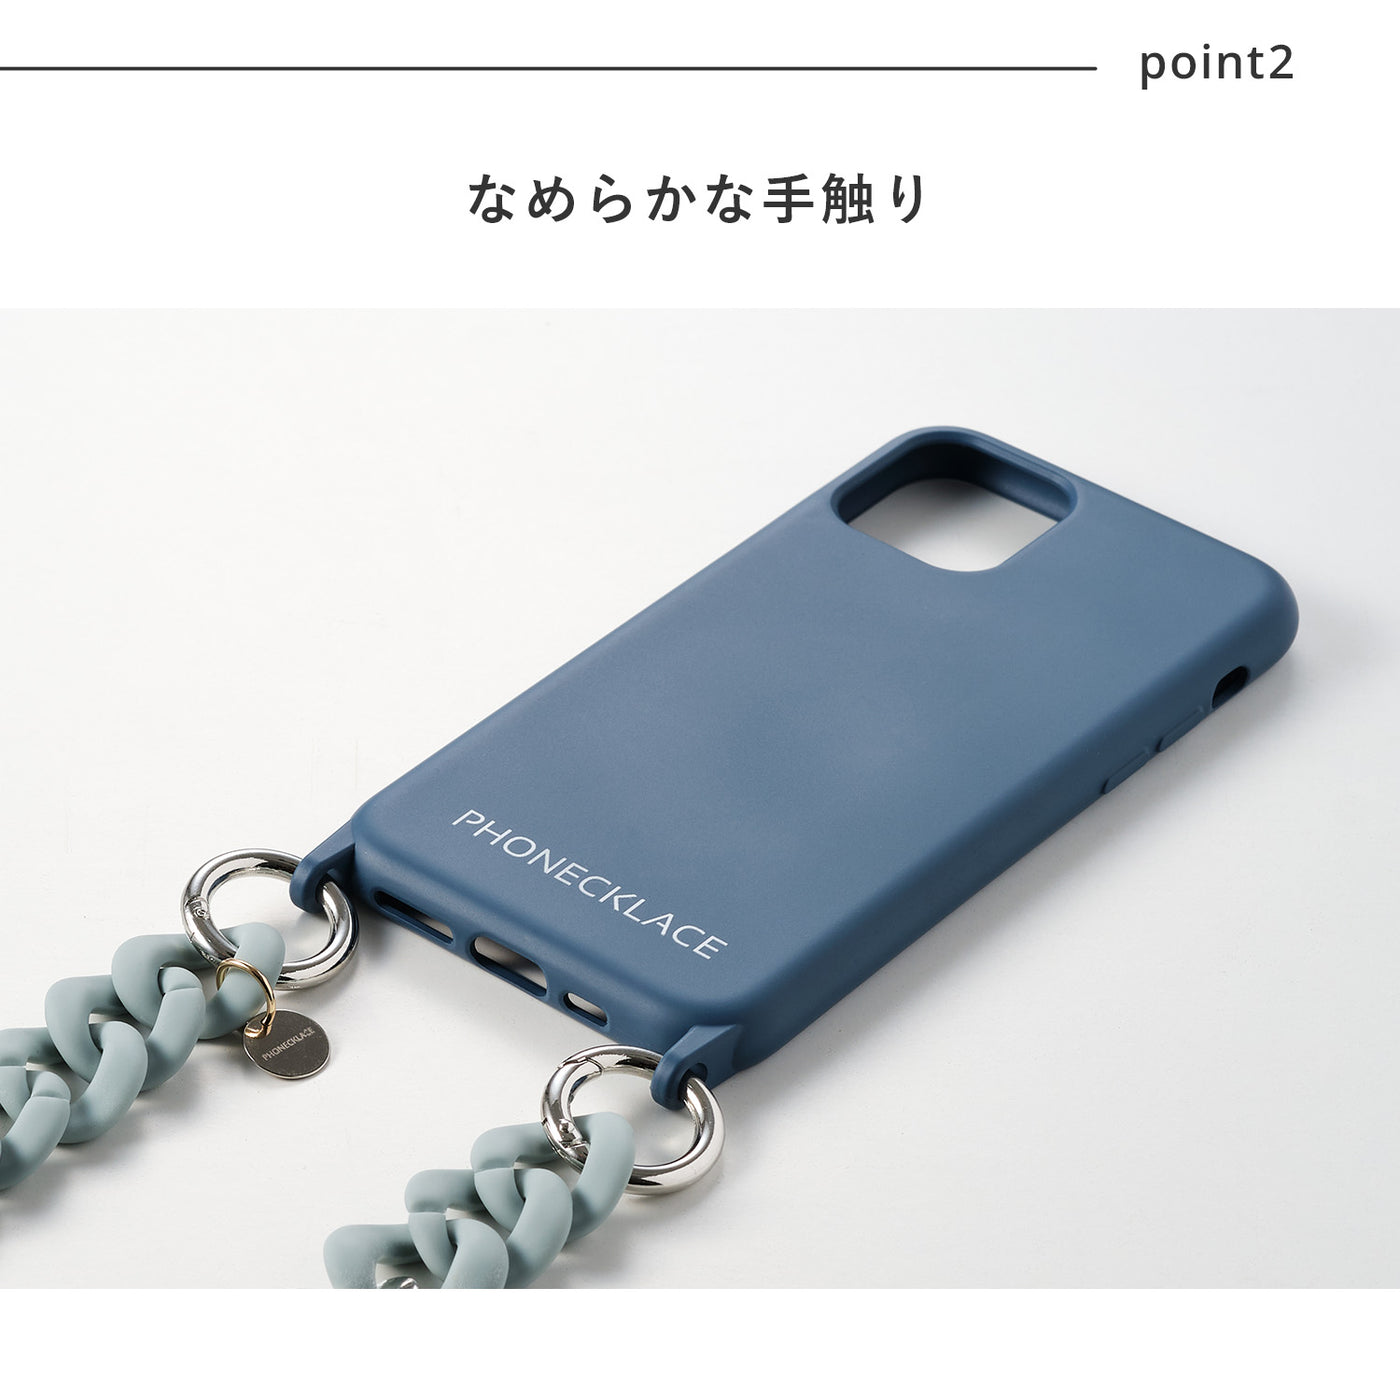 iPhone13 シリコンケース本体 Silicone Case | PHONECKLACE（フォンネックレス）